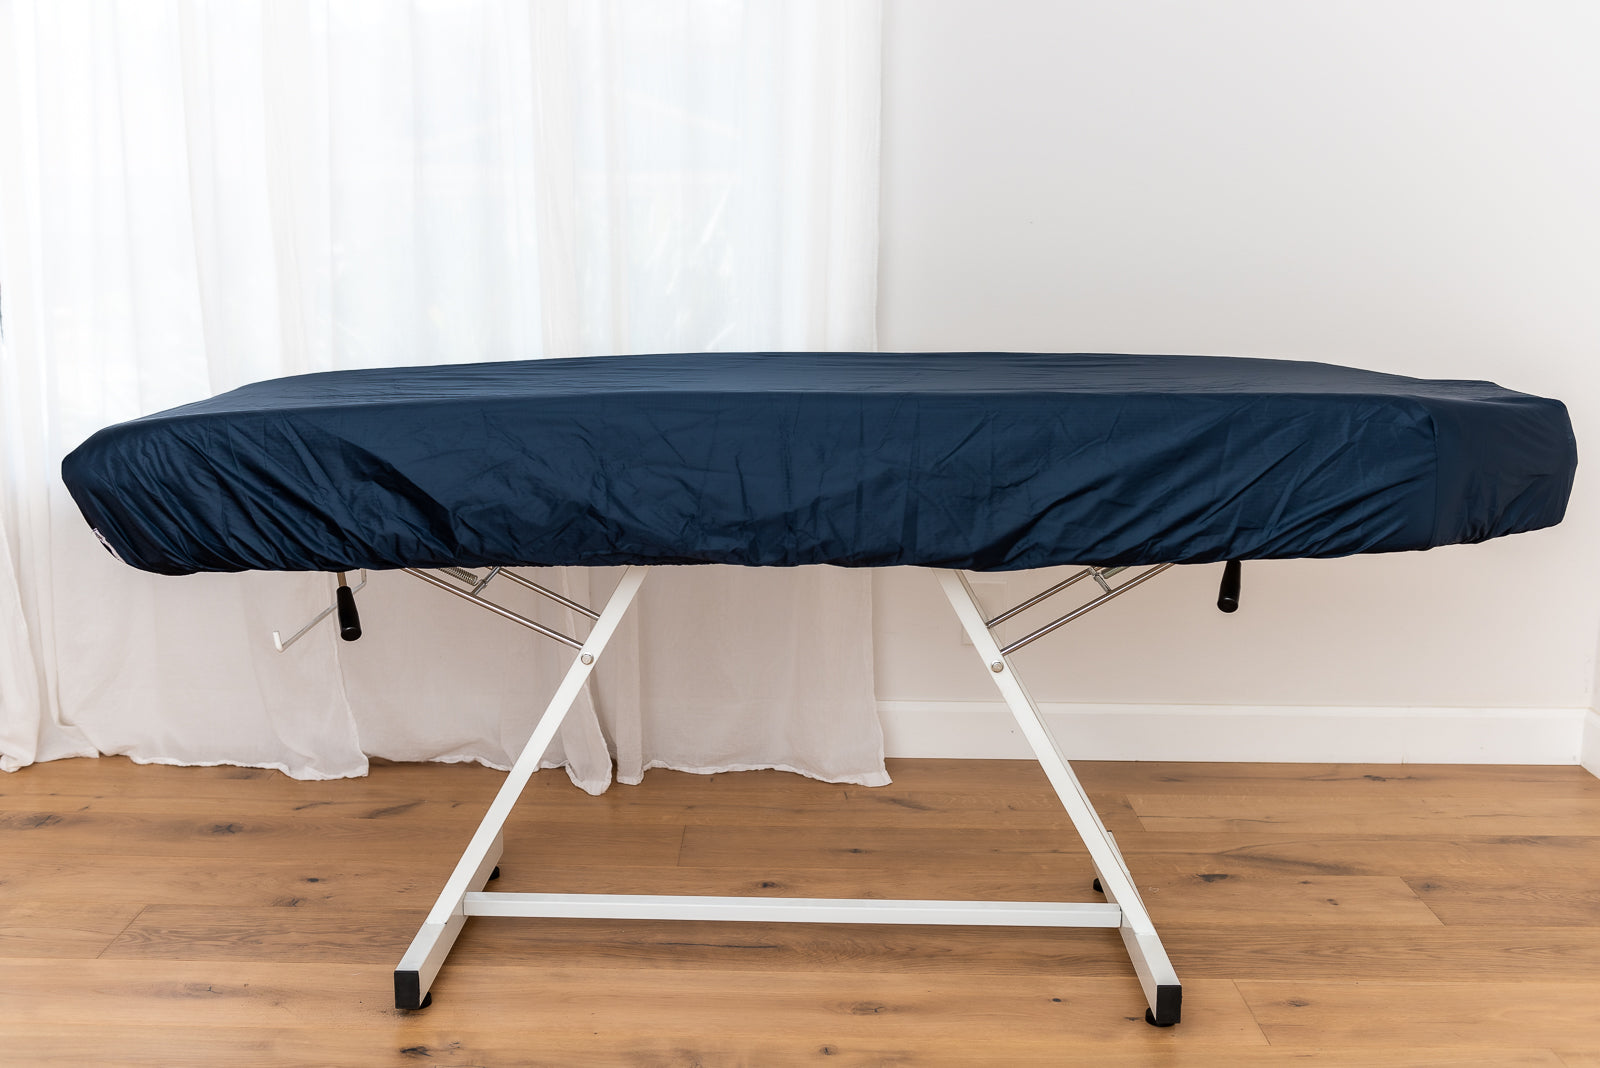 Nylon Protective Cover for Spa Bed Topper